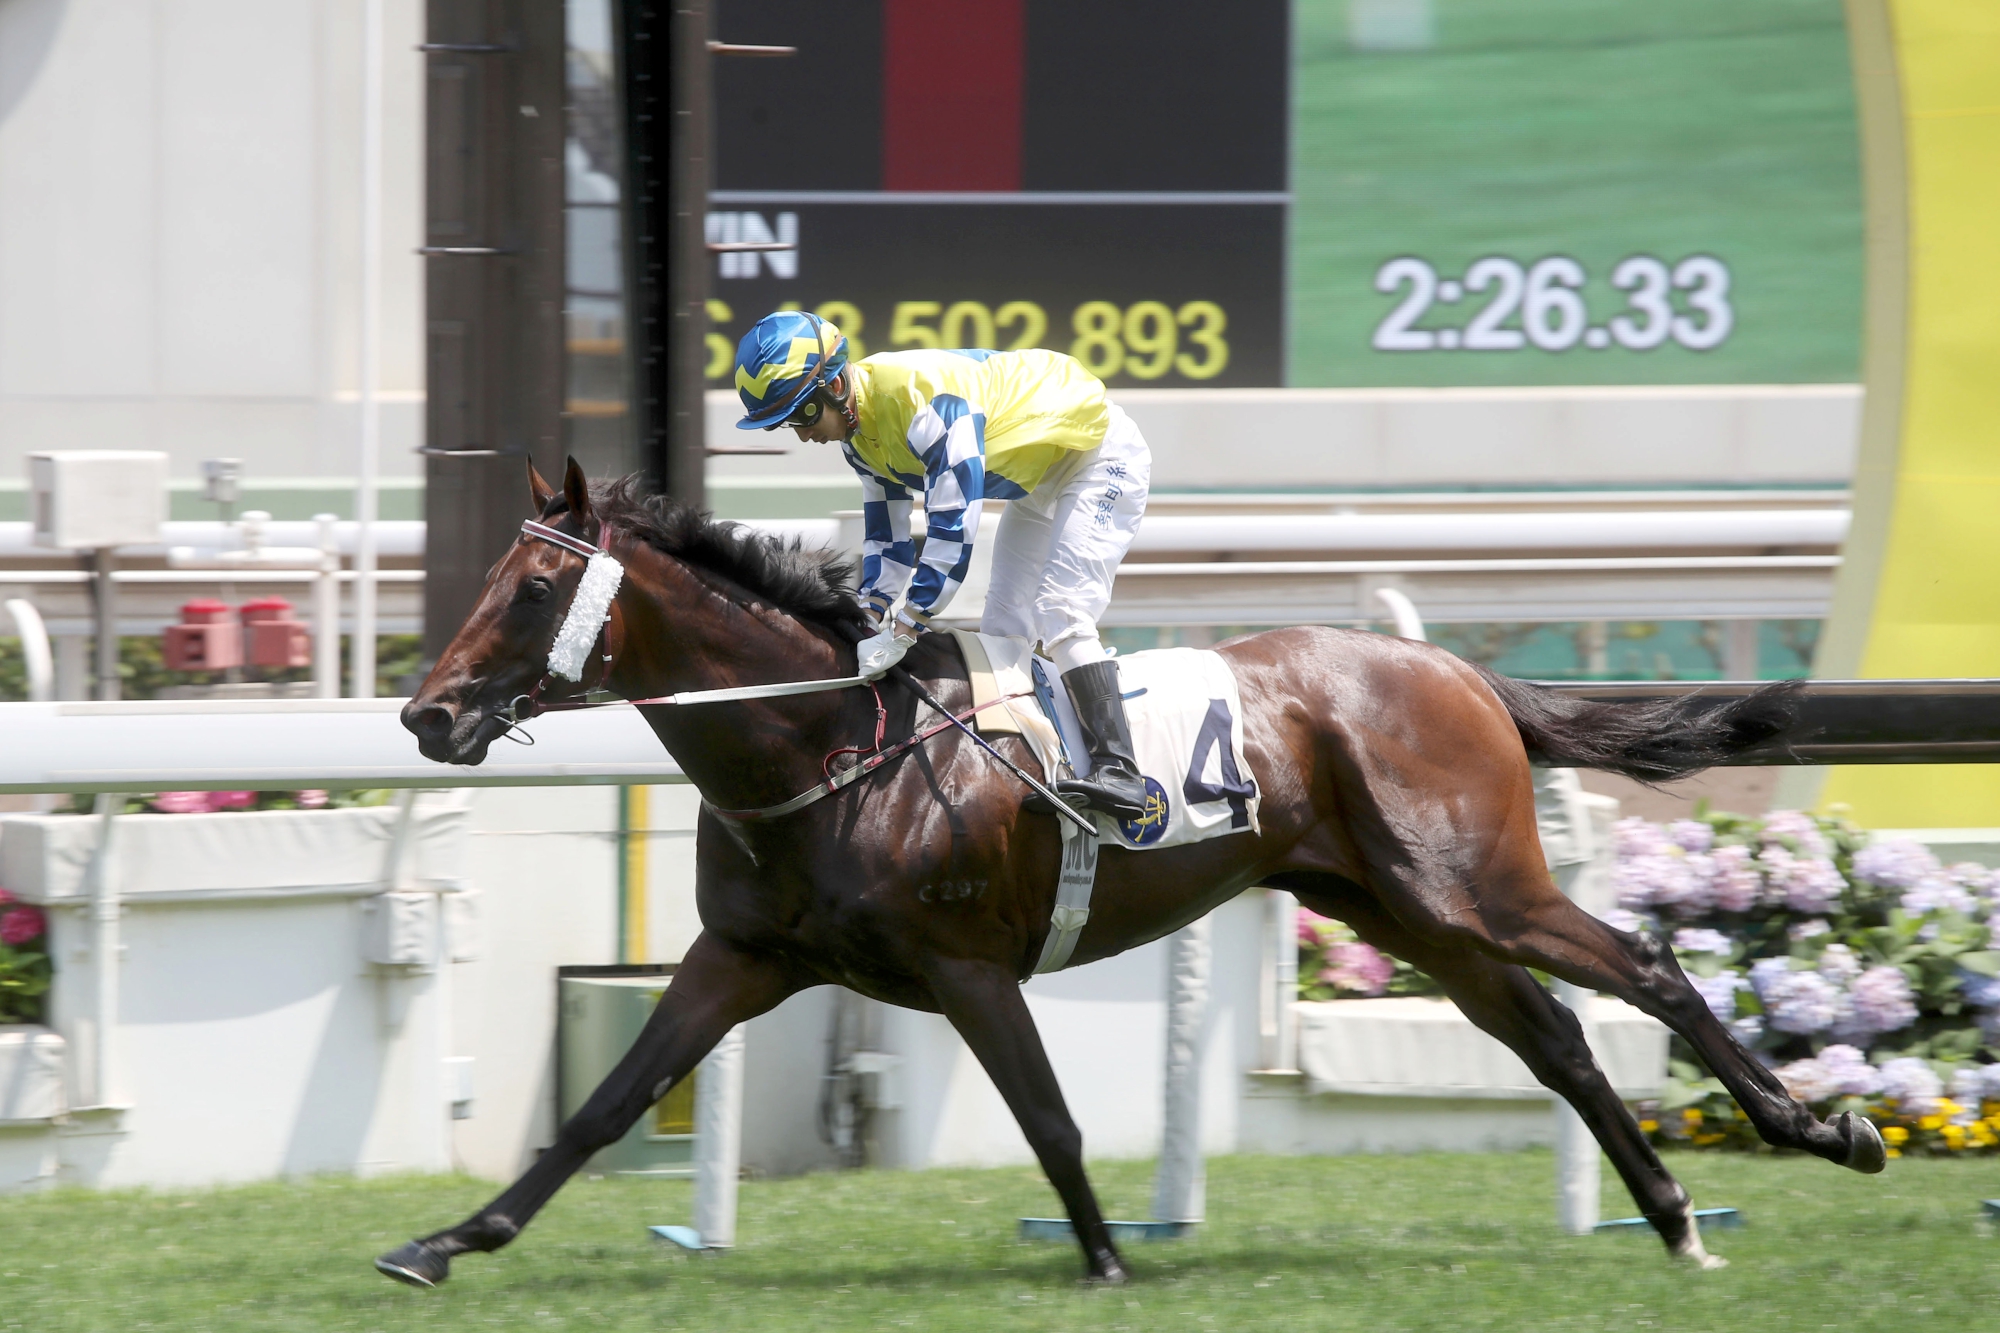 Chefano – HK : G3 Queen Mother Memorial Cup winner over this distance; likes to roll forward but has struggled in three runs this campaign.